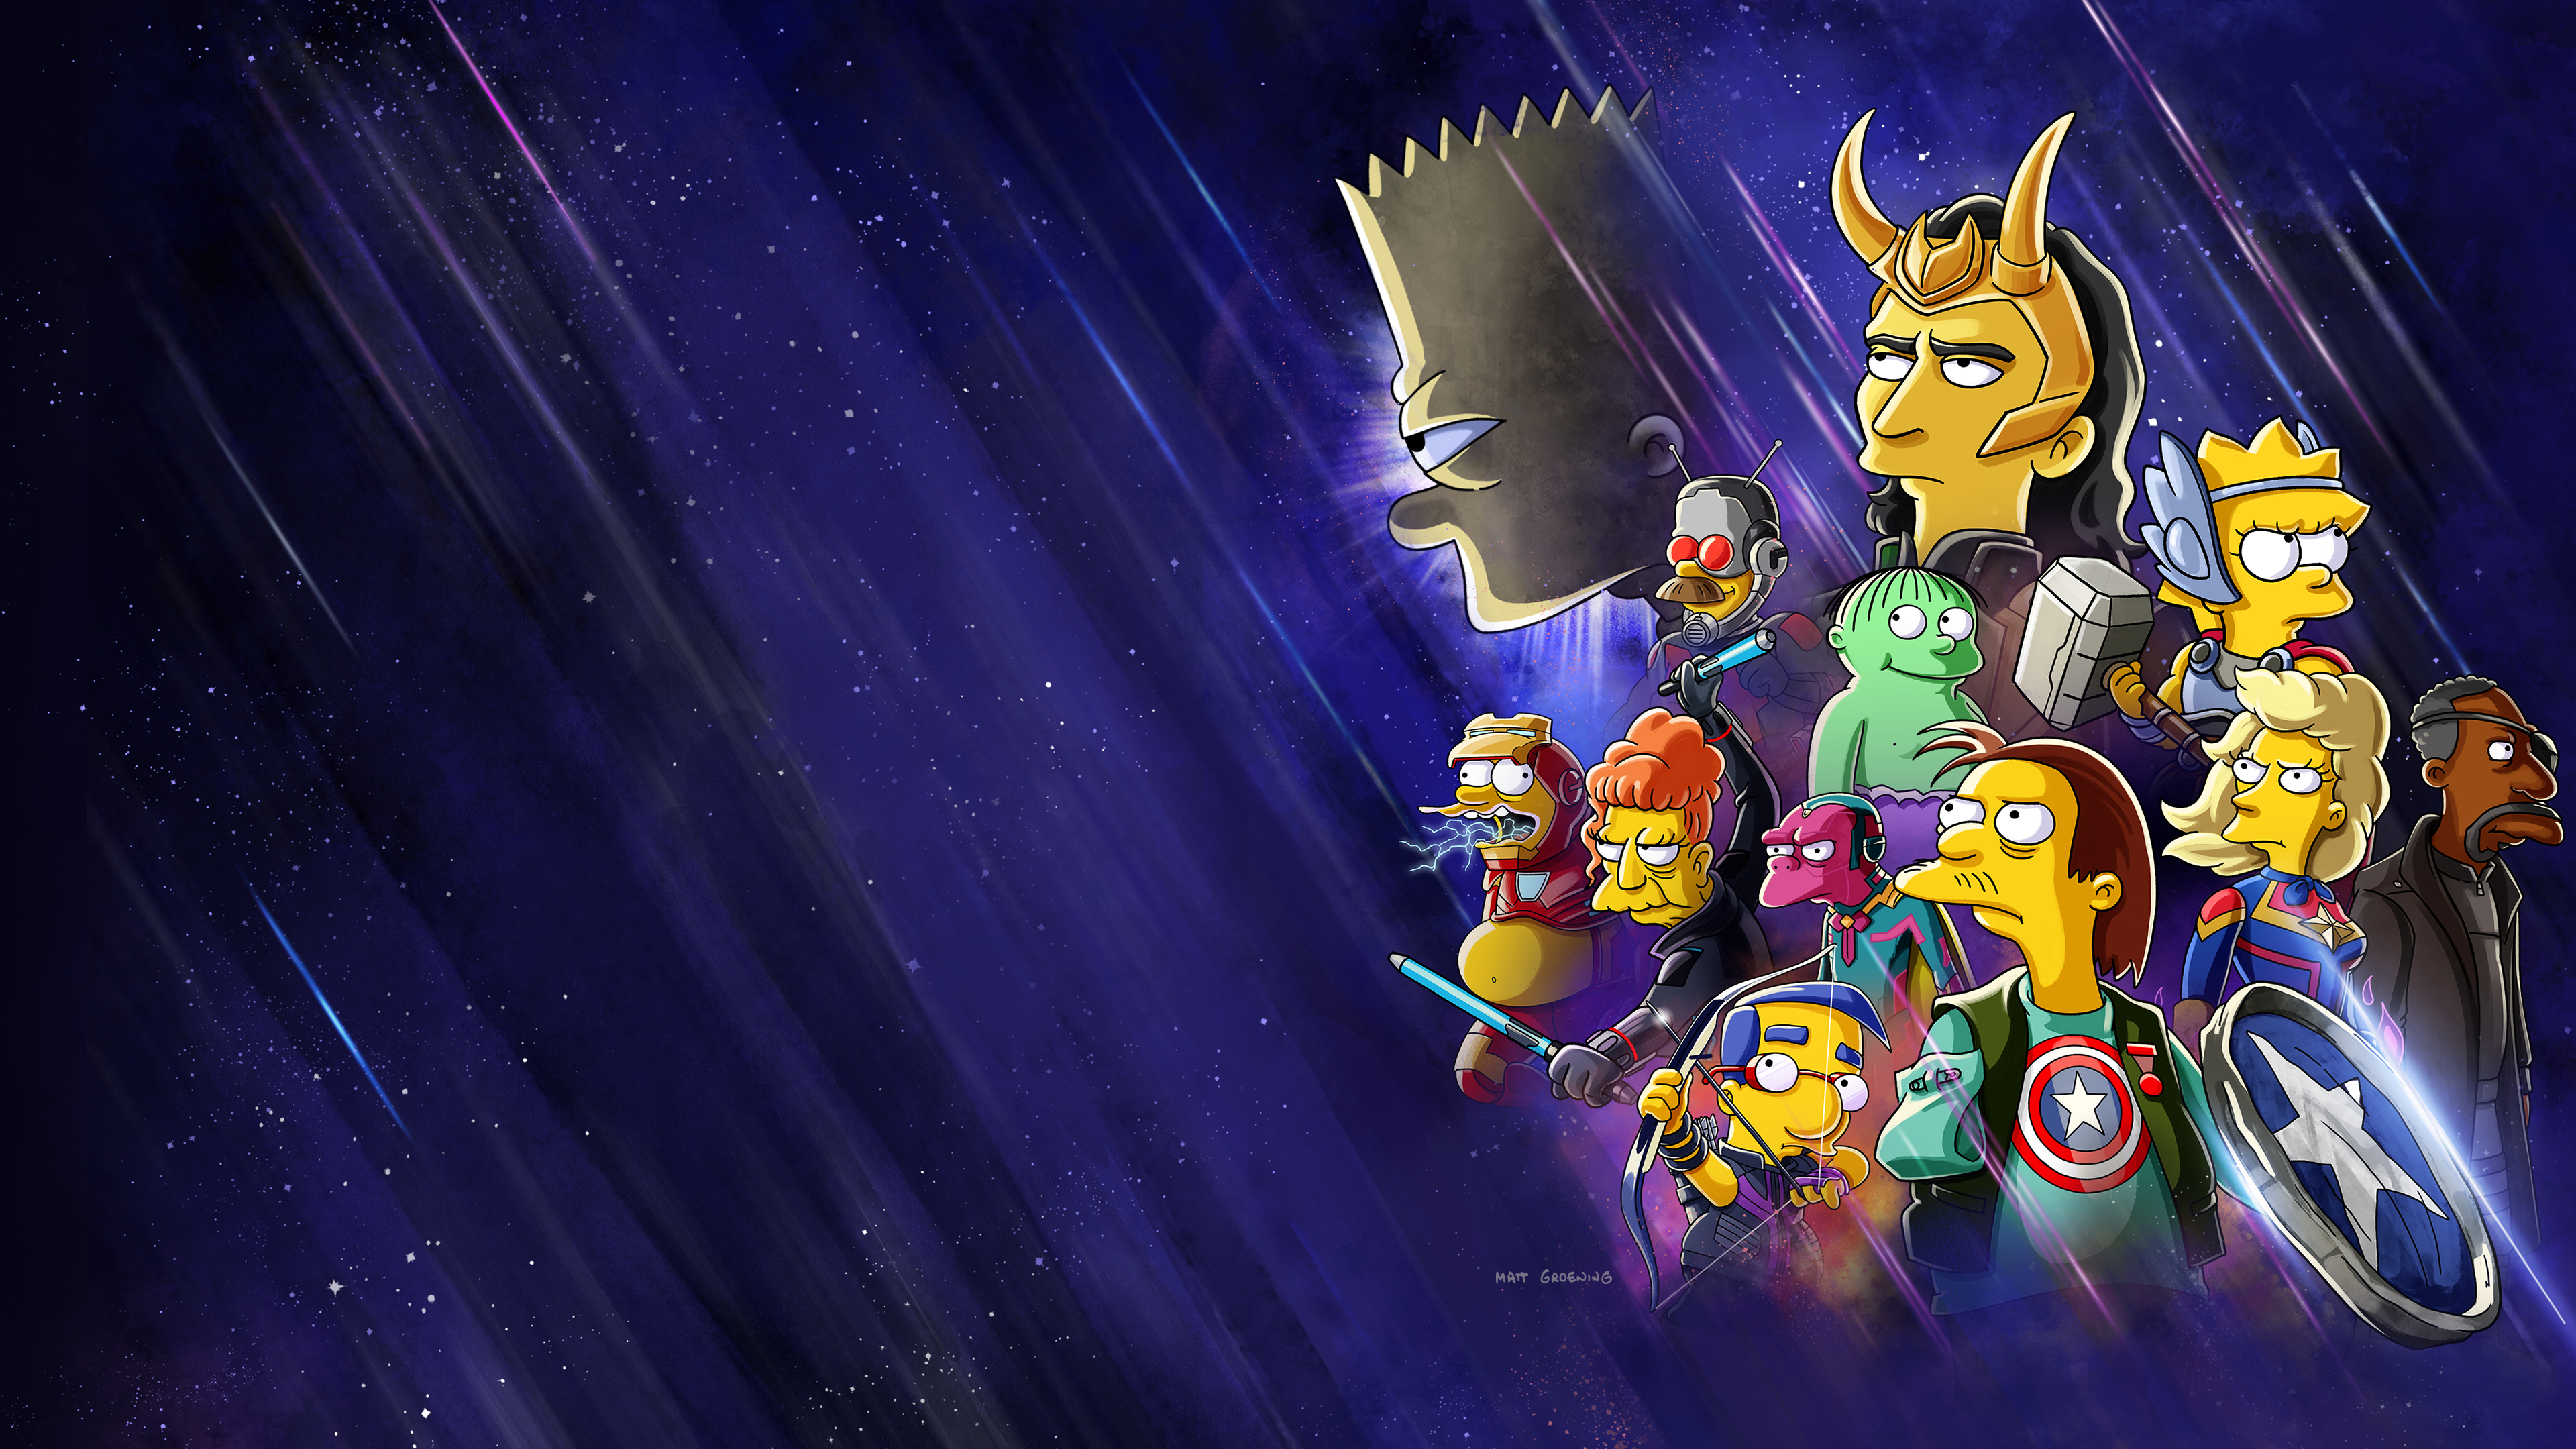 Movie The Good, The Bart, and The Loki HD Wallpaper | Background Image